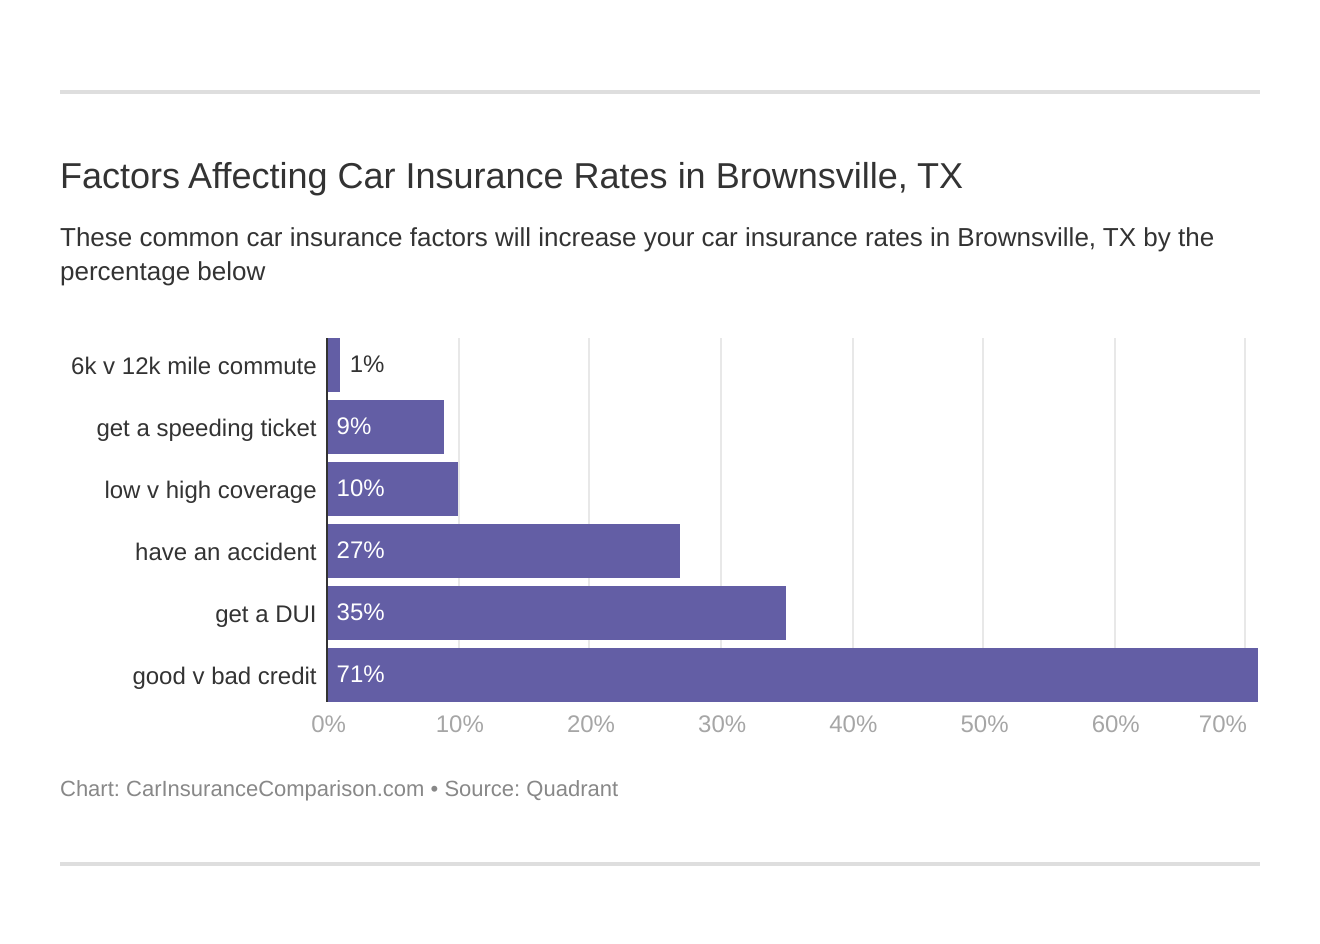 Factors Affecting Car Insurance Rates in Brownsville, TX